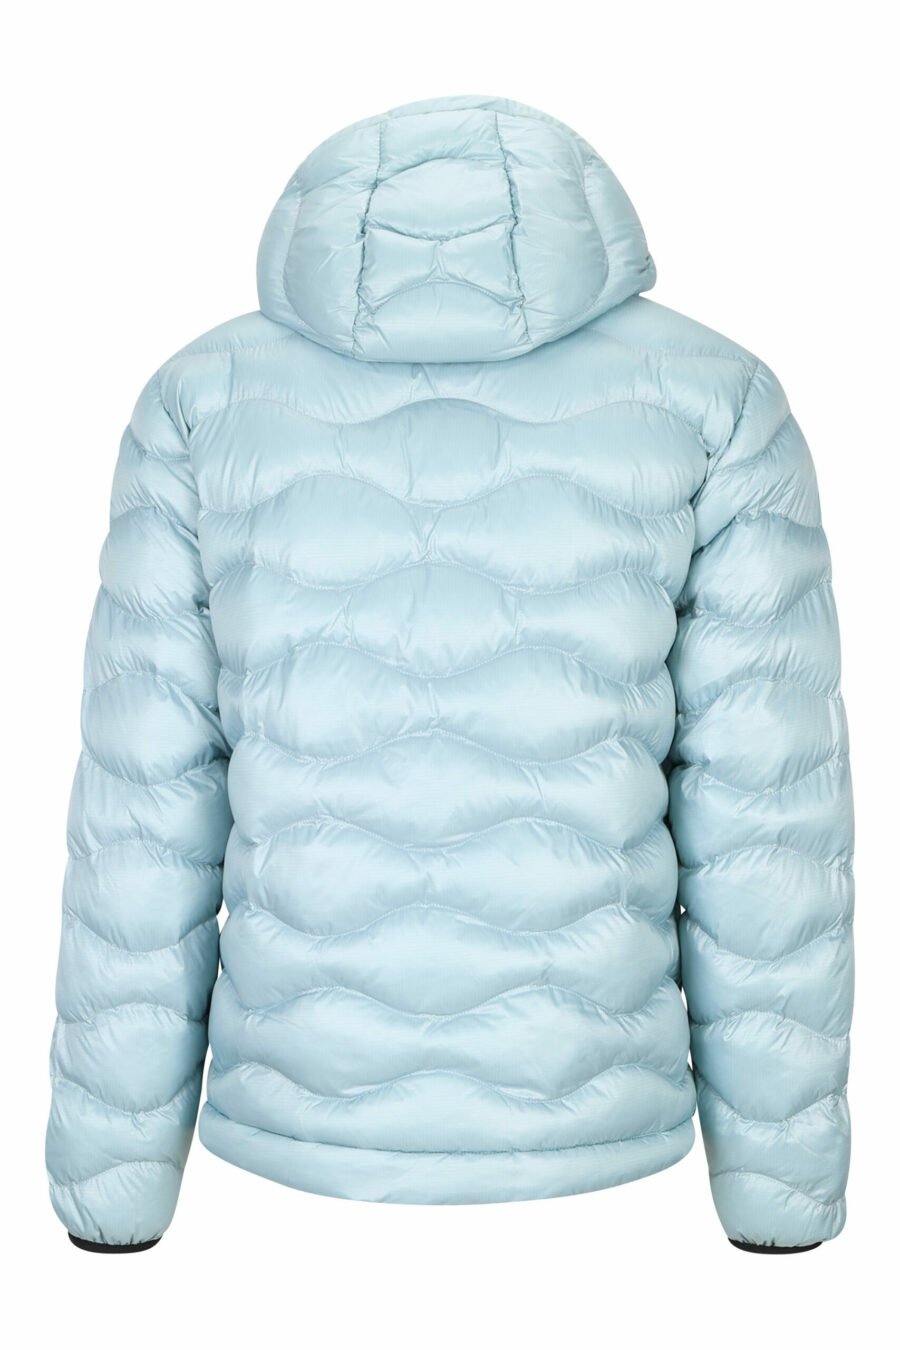 Light blue hooded jacket with wavy lines and violet lining - 8058610697198 3 scaled